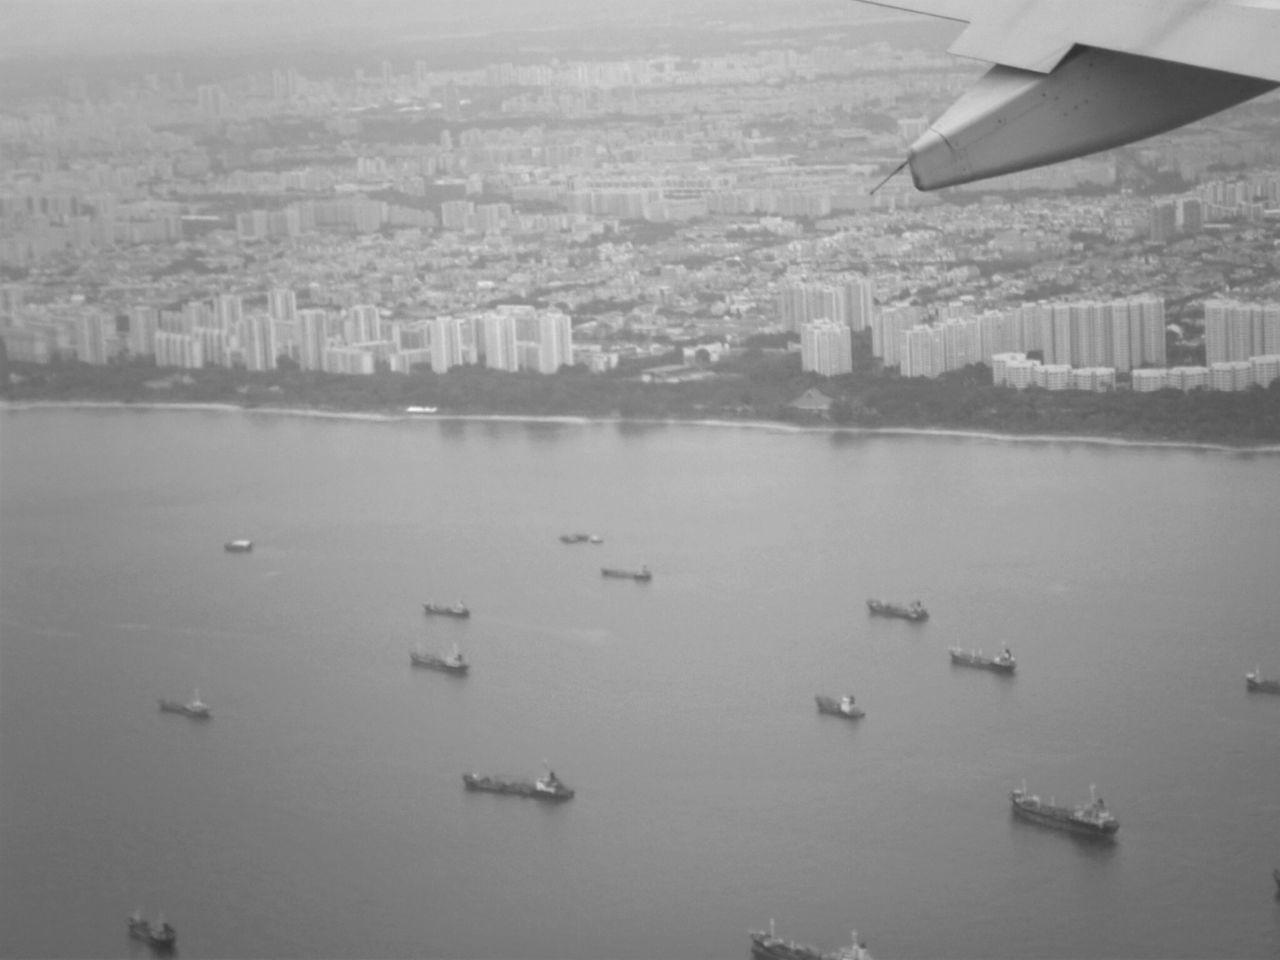 water, architecture, transportation, city, aerial view, mode of transportation, building exterior, black and white, built structure, vehicle, monochrome, cityscape, nature, flying, monochrome photography, travel, no people, air vehicle, travel destinations, building, day, sky, high angle view, airplane, nautical vessel, landscape, outdoors, aircraft, aerial photography, sea, aircraft wing, environment, mid-air, urban skyline, business